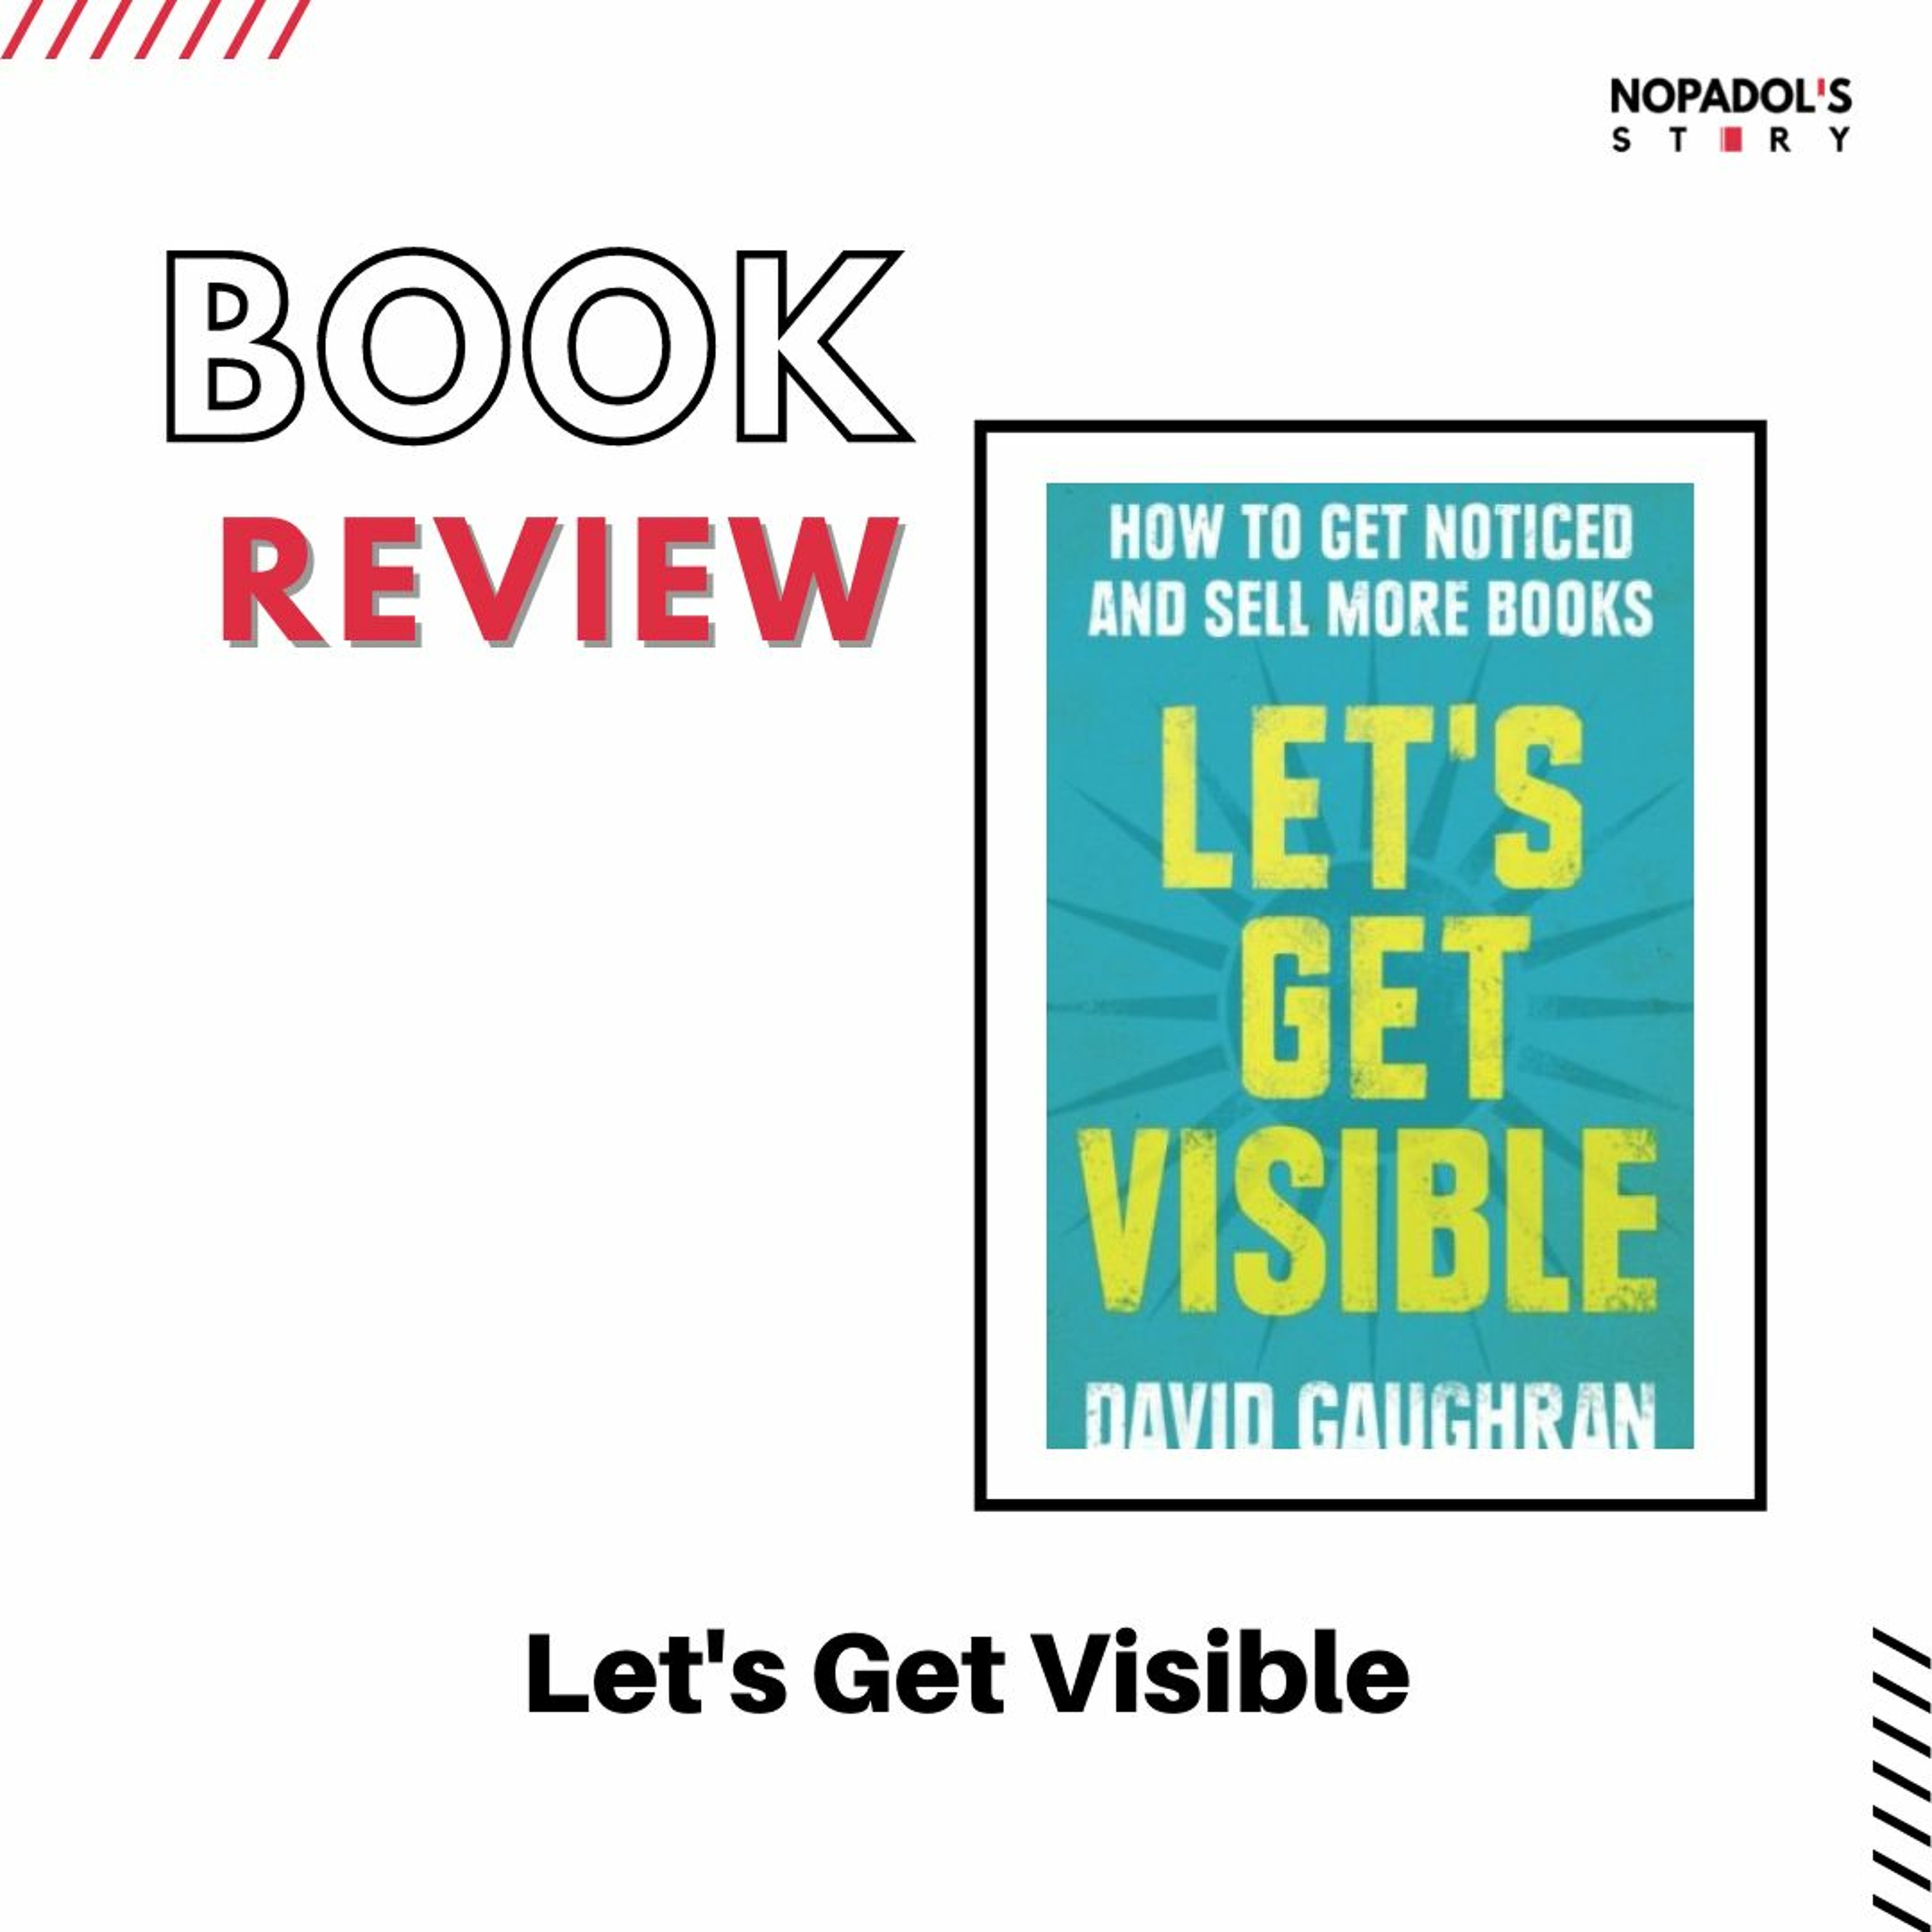 EP 1298 Book Review Let's Get Visible